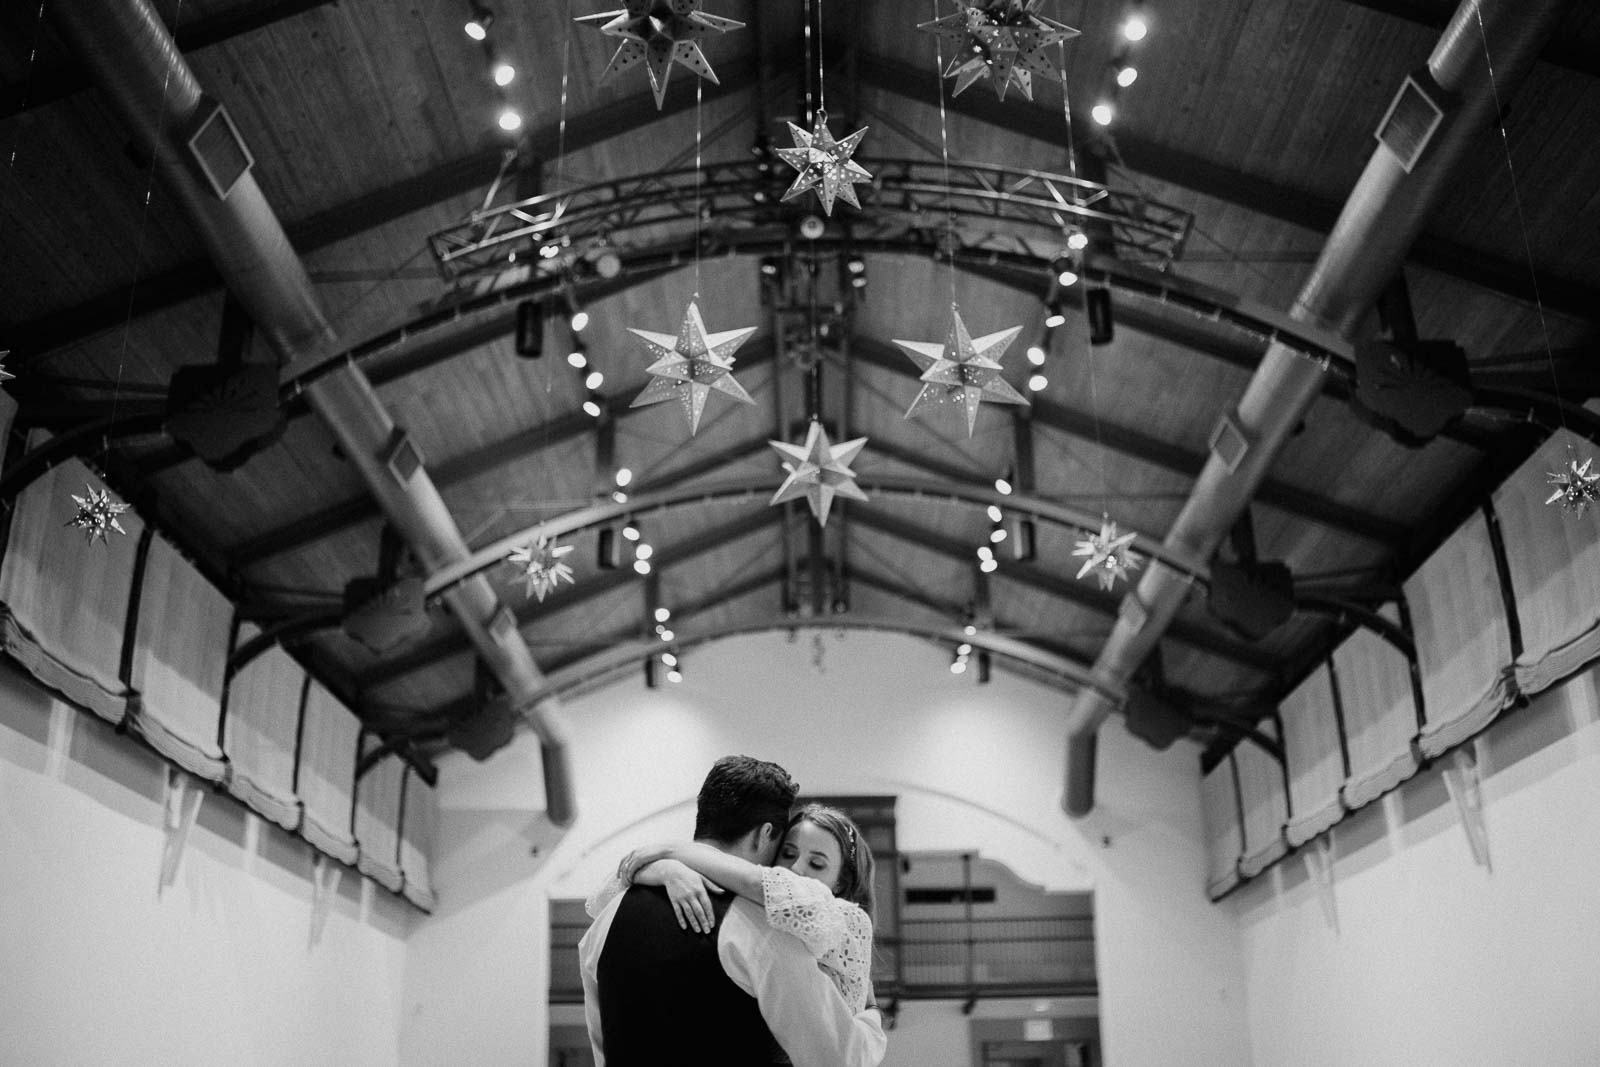 Hanging decorative stars hang from the ceiling at the McNay as the couple embrace during the last dance